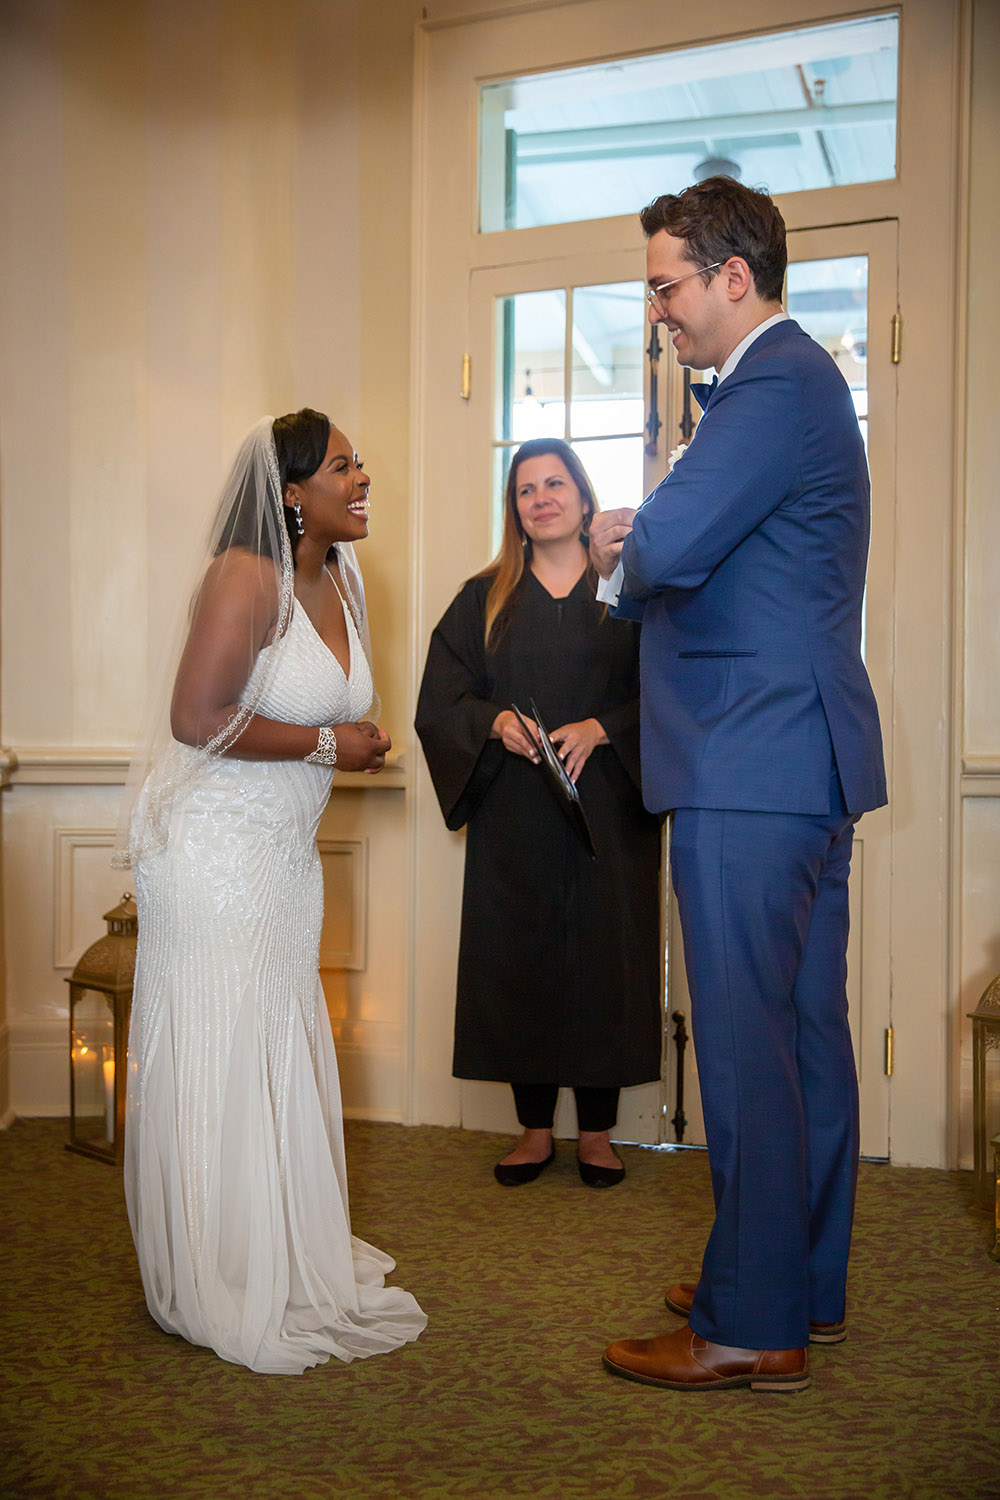 Kiara and Michael exchange vows with Michele Zeller officiating. Photo: Brian Jarreau Photography